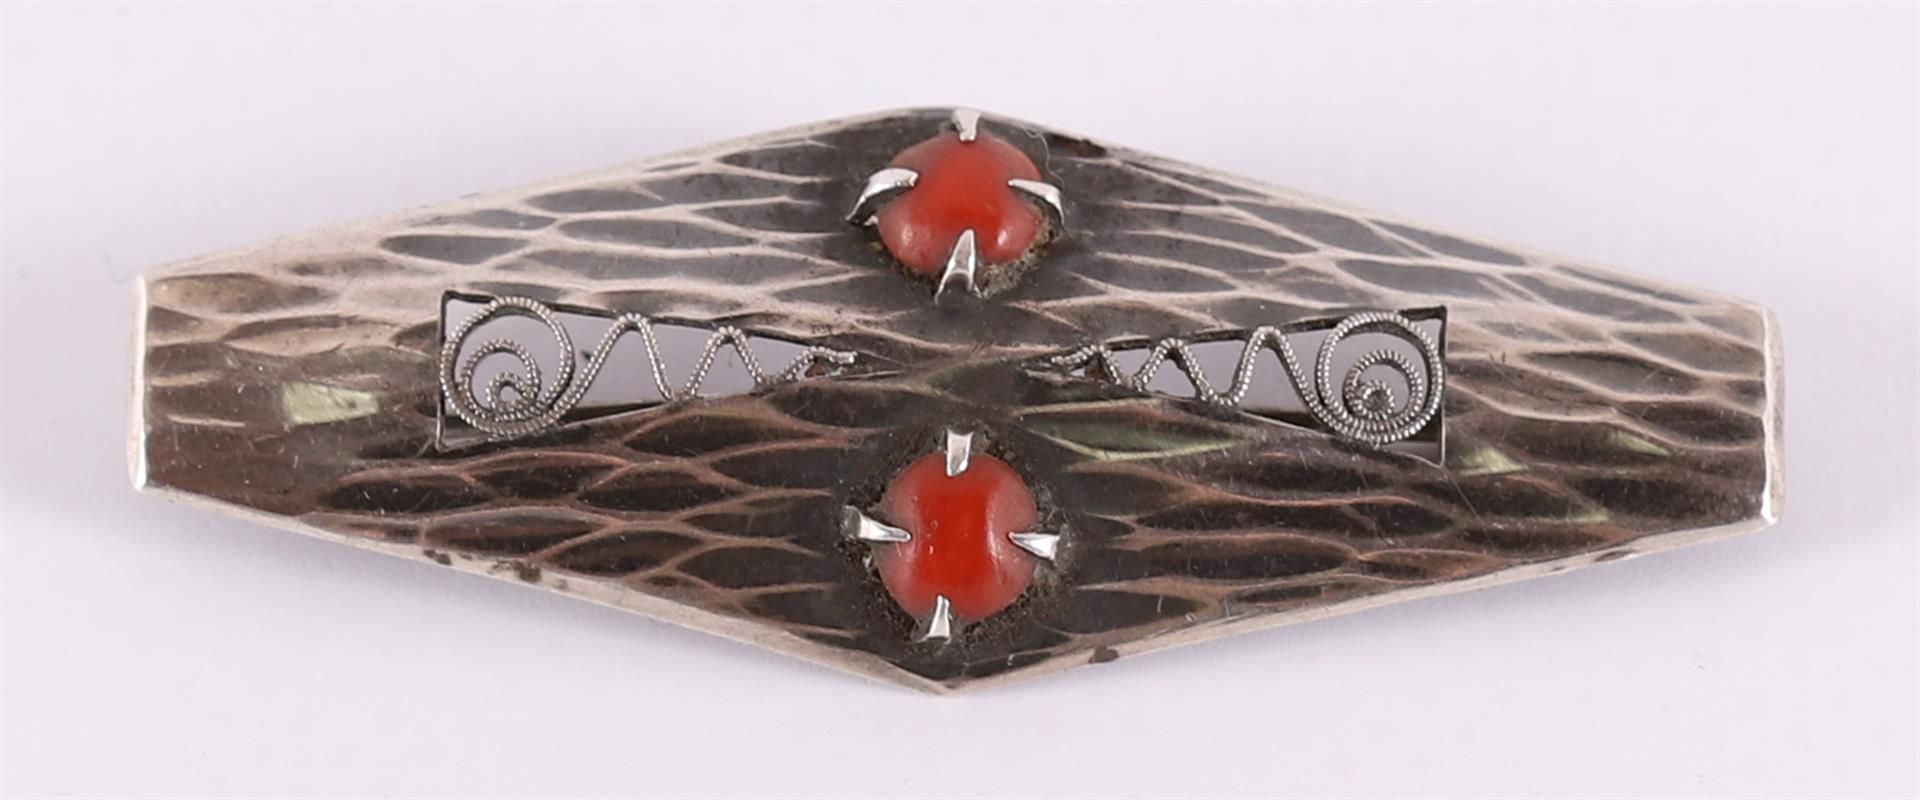 A hammered silver brooch with cabochon cut red corals. D.P.M. Gaillard